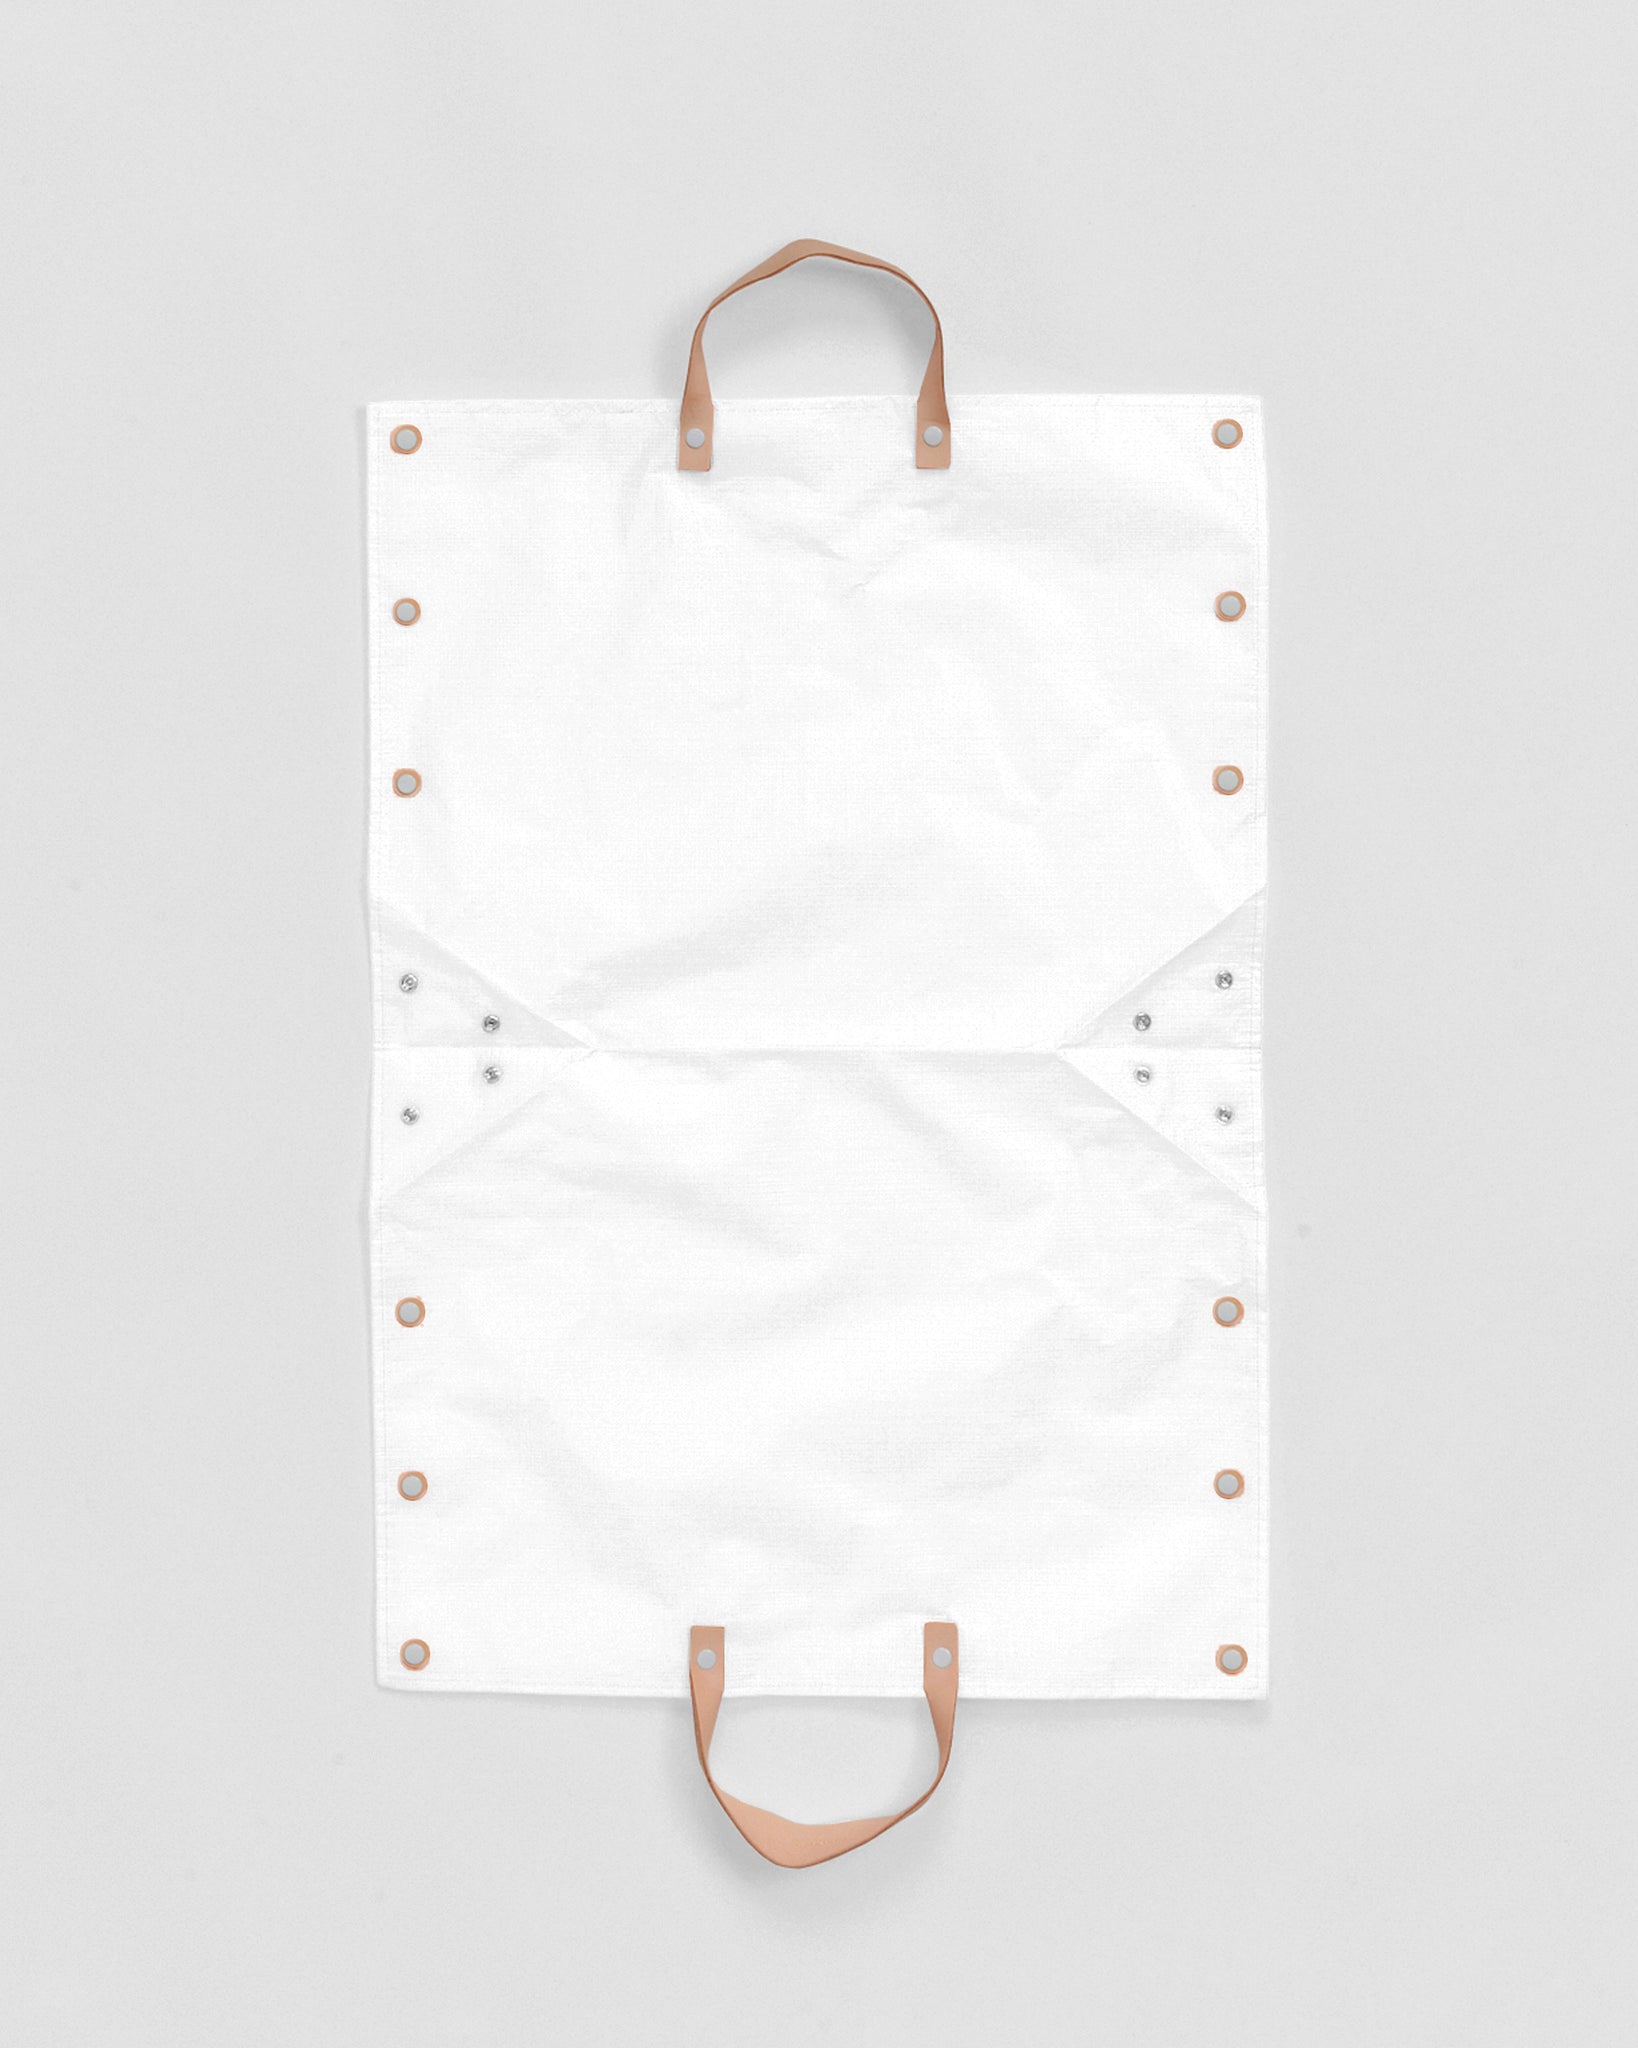 Flat image of an open Hender Scheme picnic bag for couple.